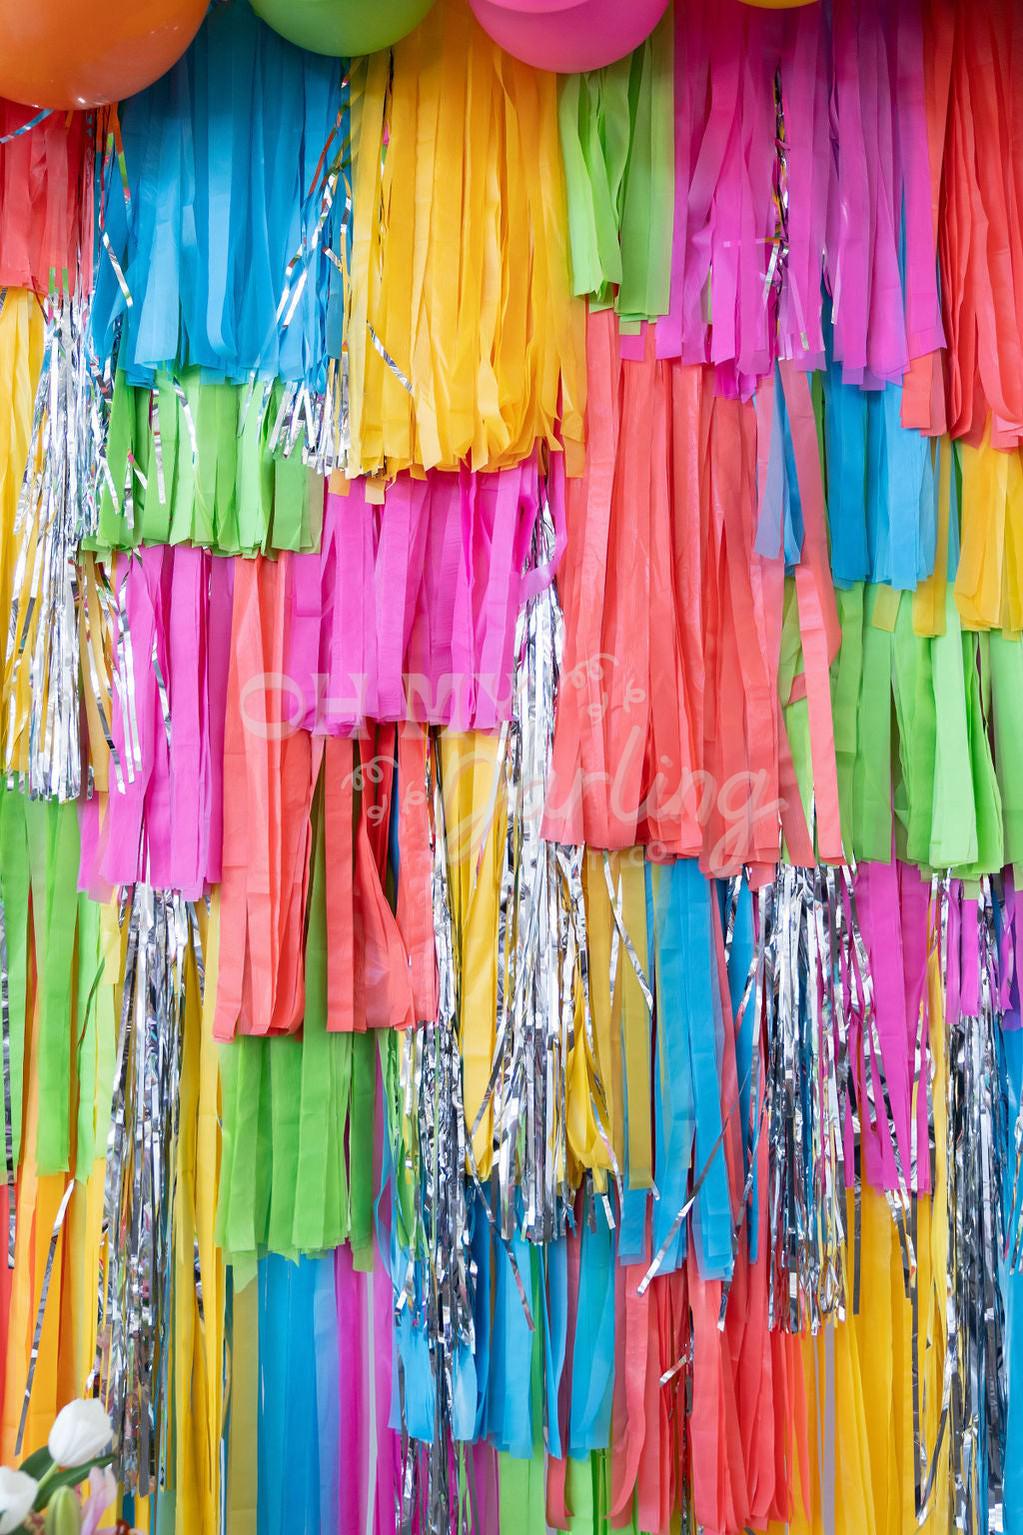 Ready to Ship: Splashing Into Summer Backdrop-Fringe Backdrop-Party Decor-Oh My Darling Party Co-Oh My Darling Party Co-backdrops for party, balloon garlands, birthday boy, birthday decorations, birthday girl, Birthday Party, blue, BLUE BACKDROP, BLUE BACKDROPS, bright rainbow, candy pink, colorful, coral, fringe backdrop, fringe decor, fringe garland, Fringe Streamers, gender neutral birthday, green, GREEN BACKDROP, GREEN BACKDROPS, happy birthday, lime green, neon, neon glow party, neon party, neon rainbo